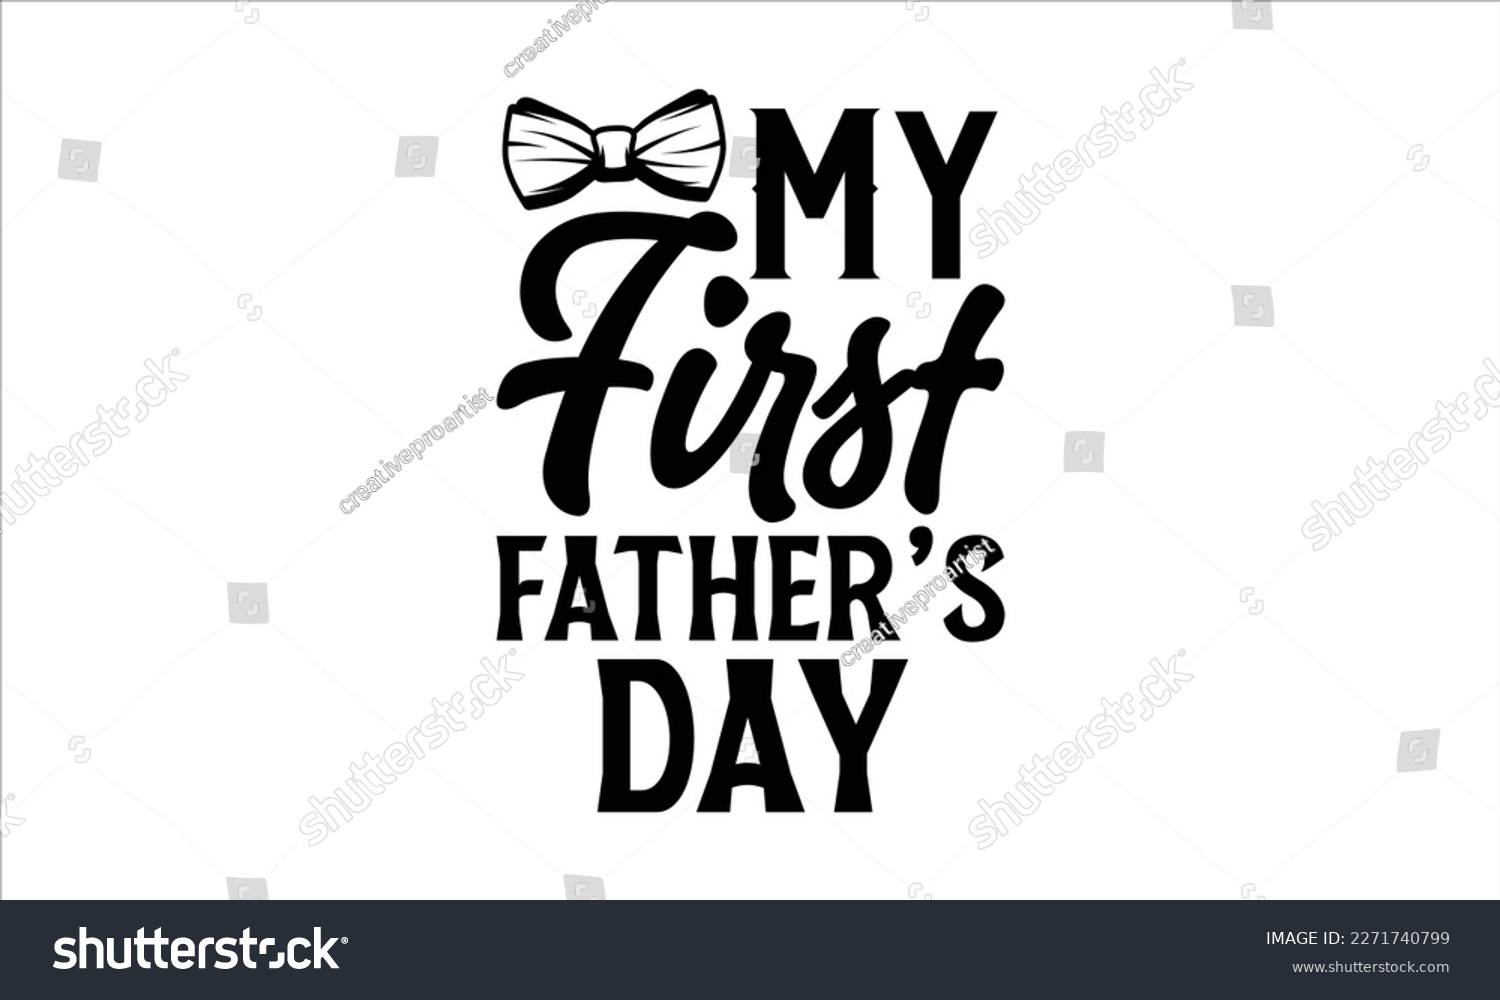 SVG of My First Father’s day- Father's Day svg design, Hand drawn lettering phrase isolated on white background, Illustration for prints on t-shirts and bags, posters, cards eps 10. svg